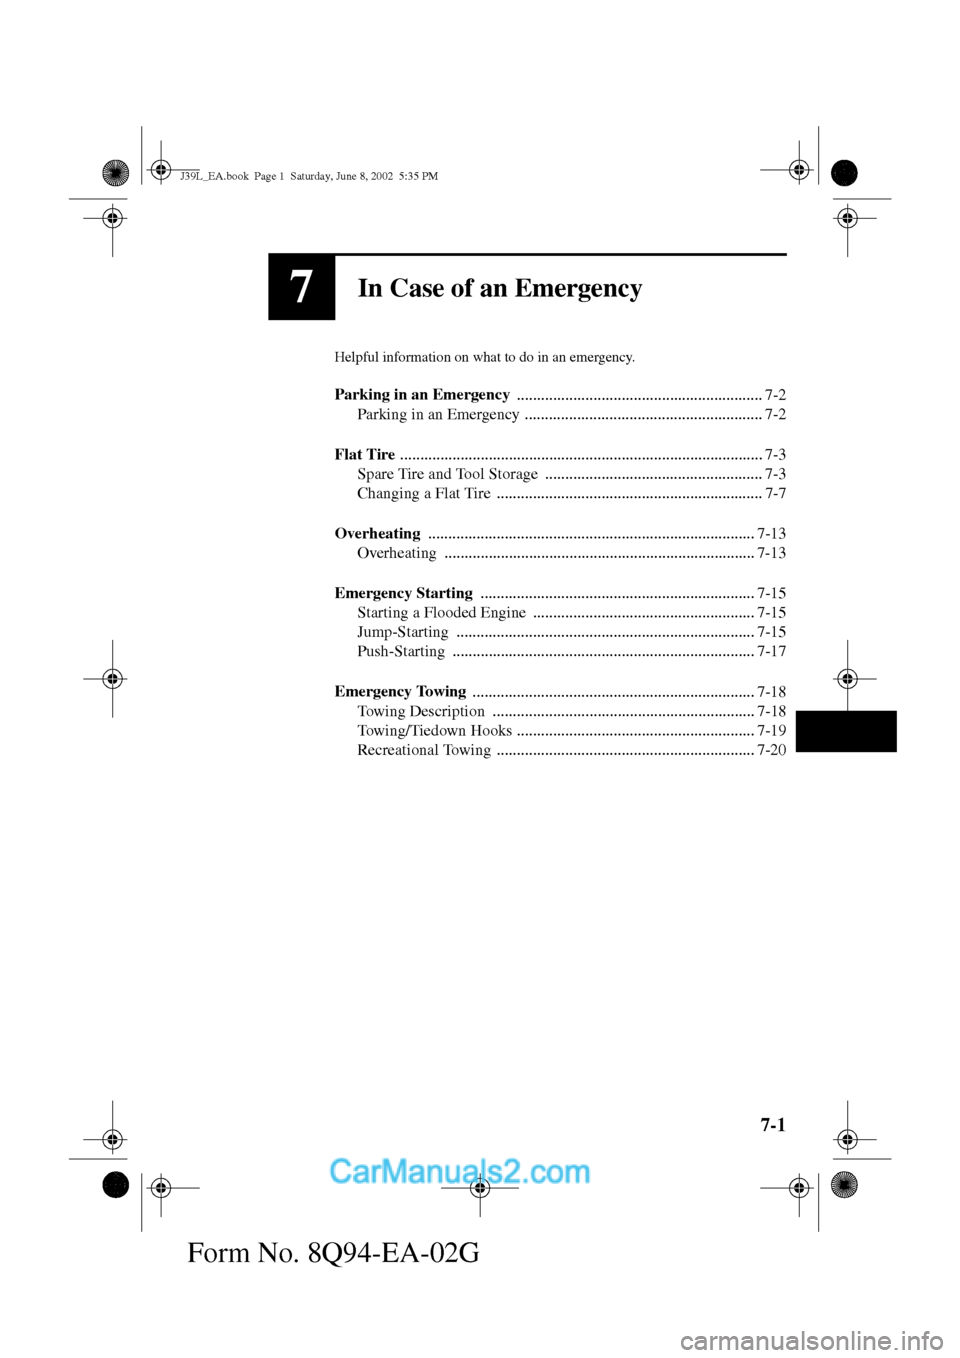 MAZDA MODEL PROTÉGÉ 2003  Owners Manual (in English) 7-1
Form No. 8Q94-EA-02G
7In Case of an Emergency
Helpful information on what to do in an emergency.
Parking in an Emergency 
............................................................. 7-2
Parking 